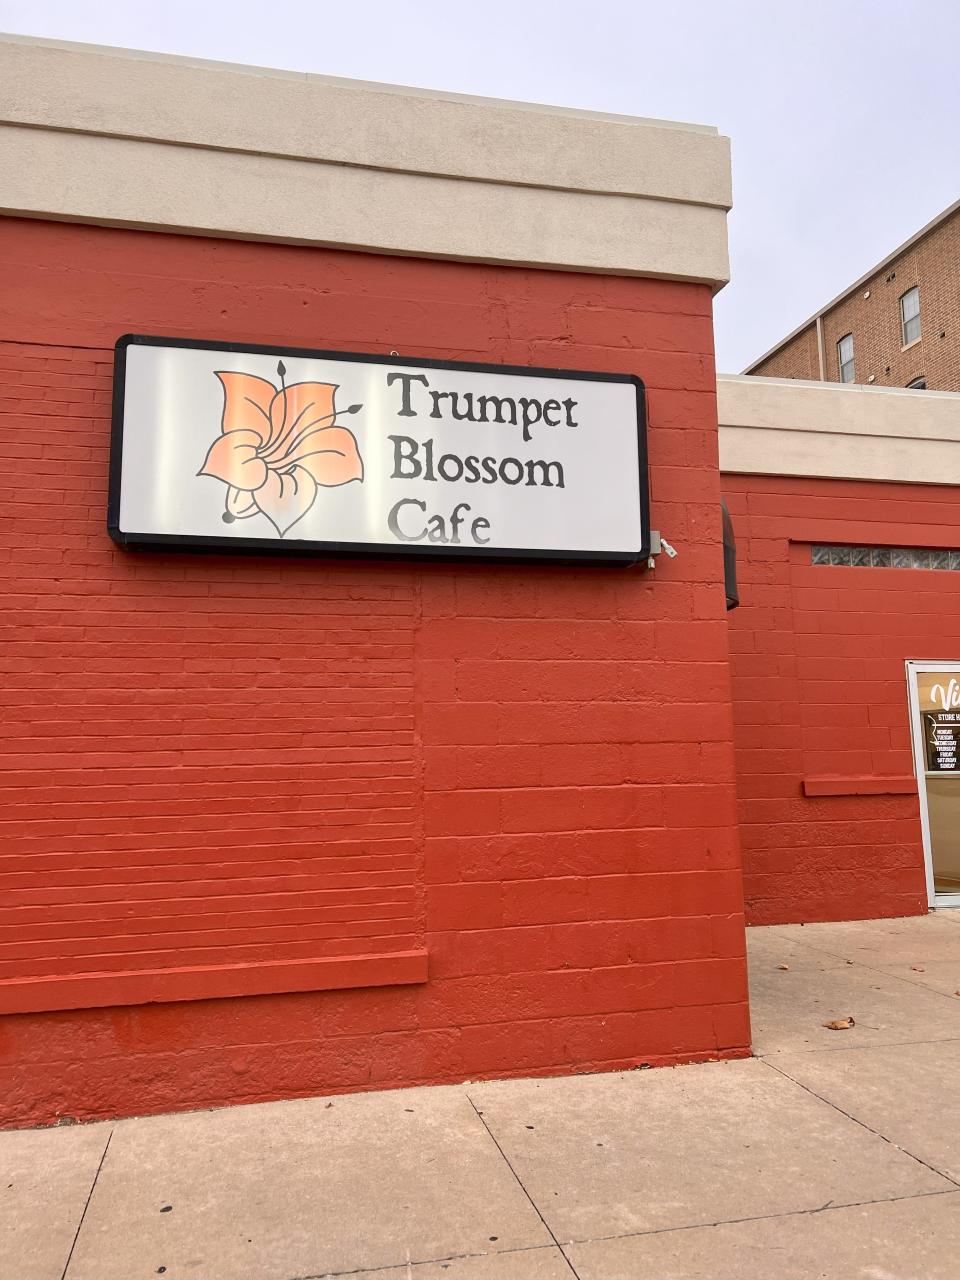 Trumpet Blossom Cafe is a vegan restaurant located at 310 E Prentiss St., Open Tuesday- Thursday from 11 a.m. to 8 p.m. and open from 11 a.m. to 9 p.m. on Friday and Saturday.